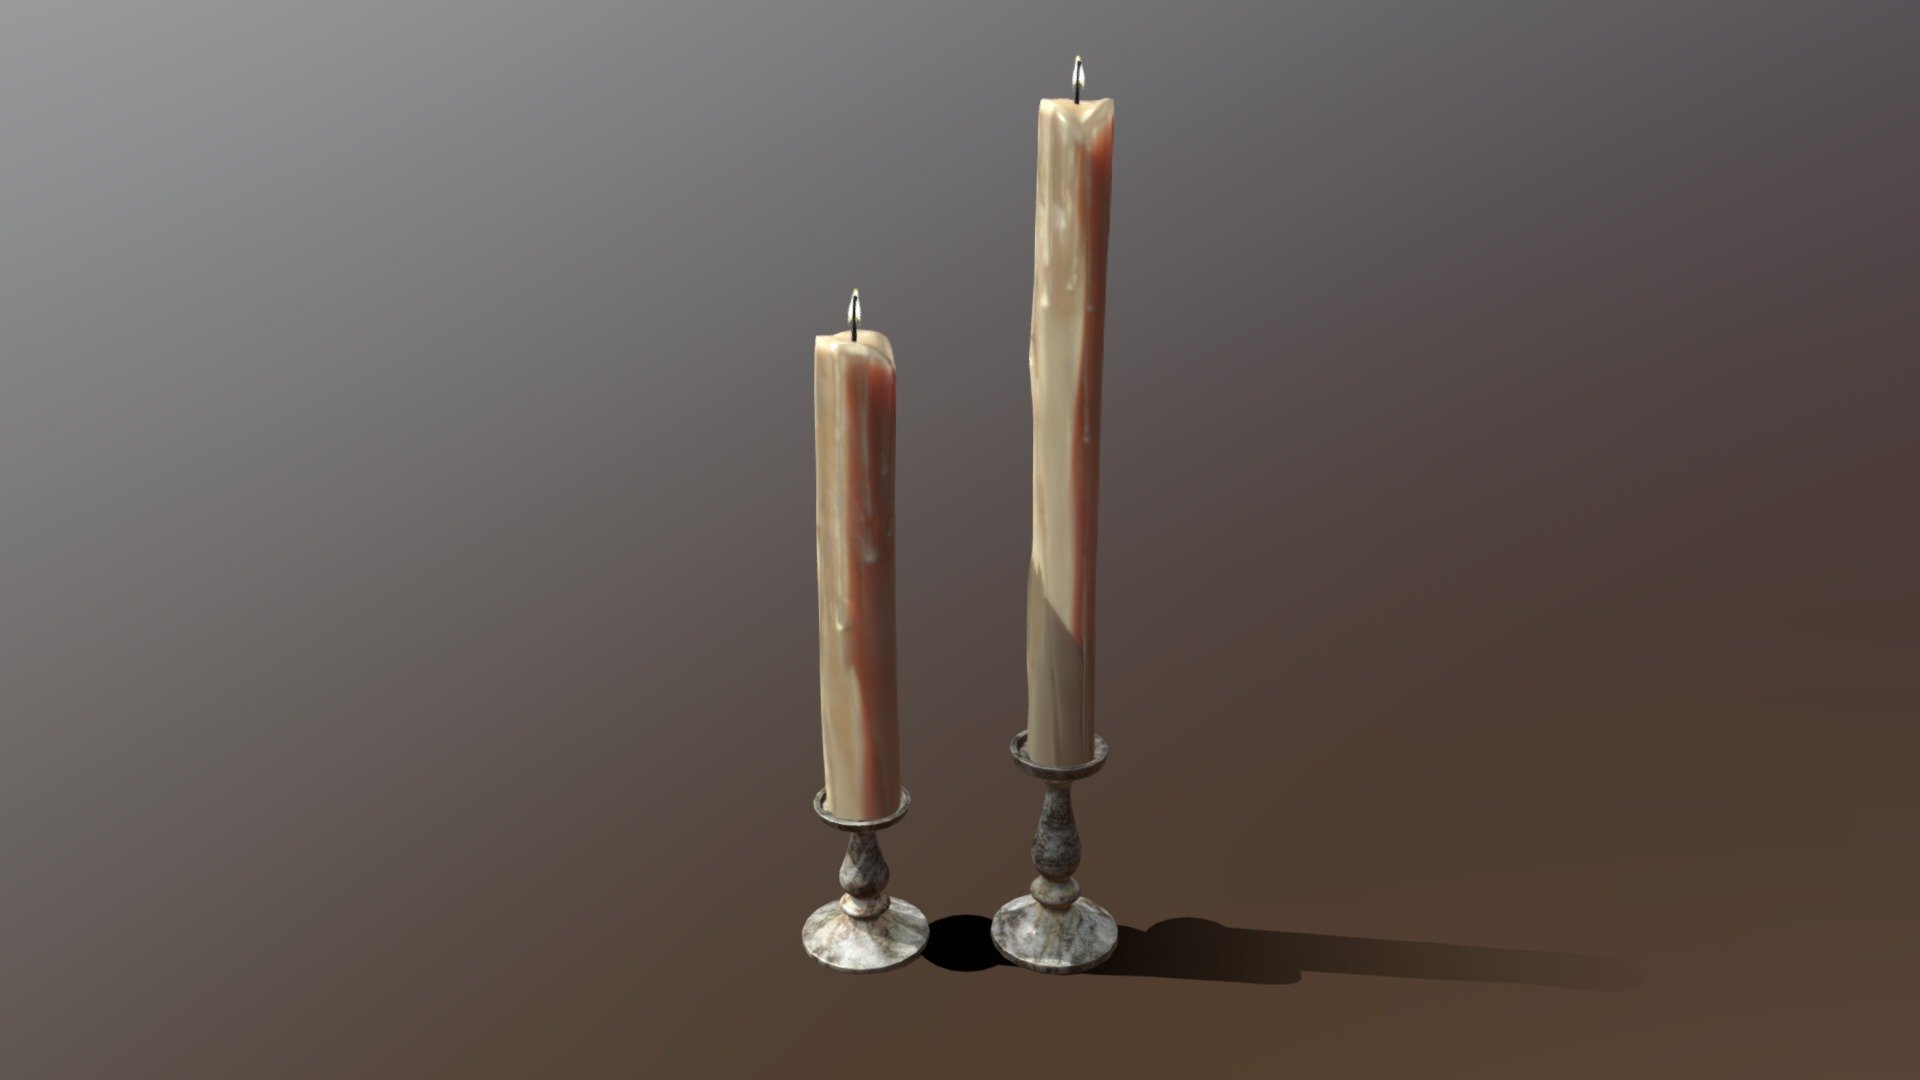 Lilac Marble CandleSticks 3D Model. This model contains the Lilac Marble CandleSticks itself 

All modeled in Maya, textured with Substance Painter.

The model was built to scale and is UV unwrapped properly. 

Contains TWO (2) Texture Sets: One for the candle and one for the Candle Holder  

⦁   9048 tris. 

⦁   Contains: .FBX .OBJ and .DAE

⦁   Model has clean topology. No Ngons.

⦁   Built to scale

⦁   Unwrapped UV Map

⦁   4K Texture set

⦁   High quality details

⦁   Based on real life references

⦁   Renders done in Marmoset Toolbag

Polycount: 

Verts 4596

Edges 9172

Faces 4588

Tris 9048

If you have any questions please feel free to ask me 3d model